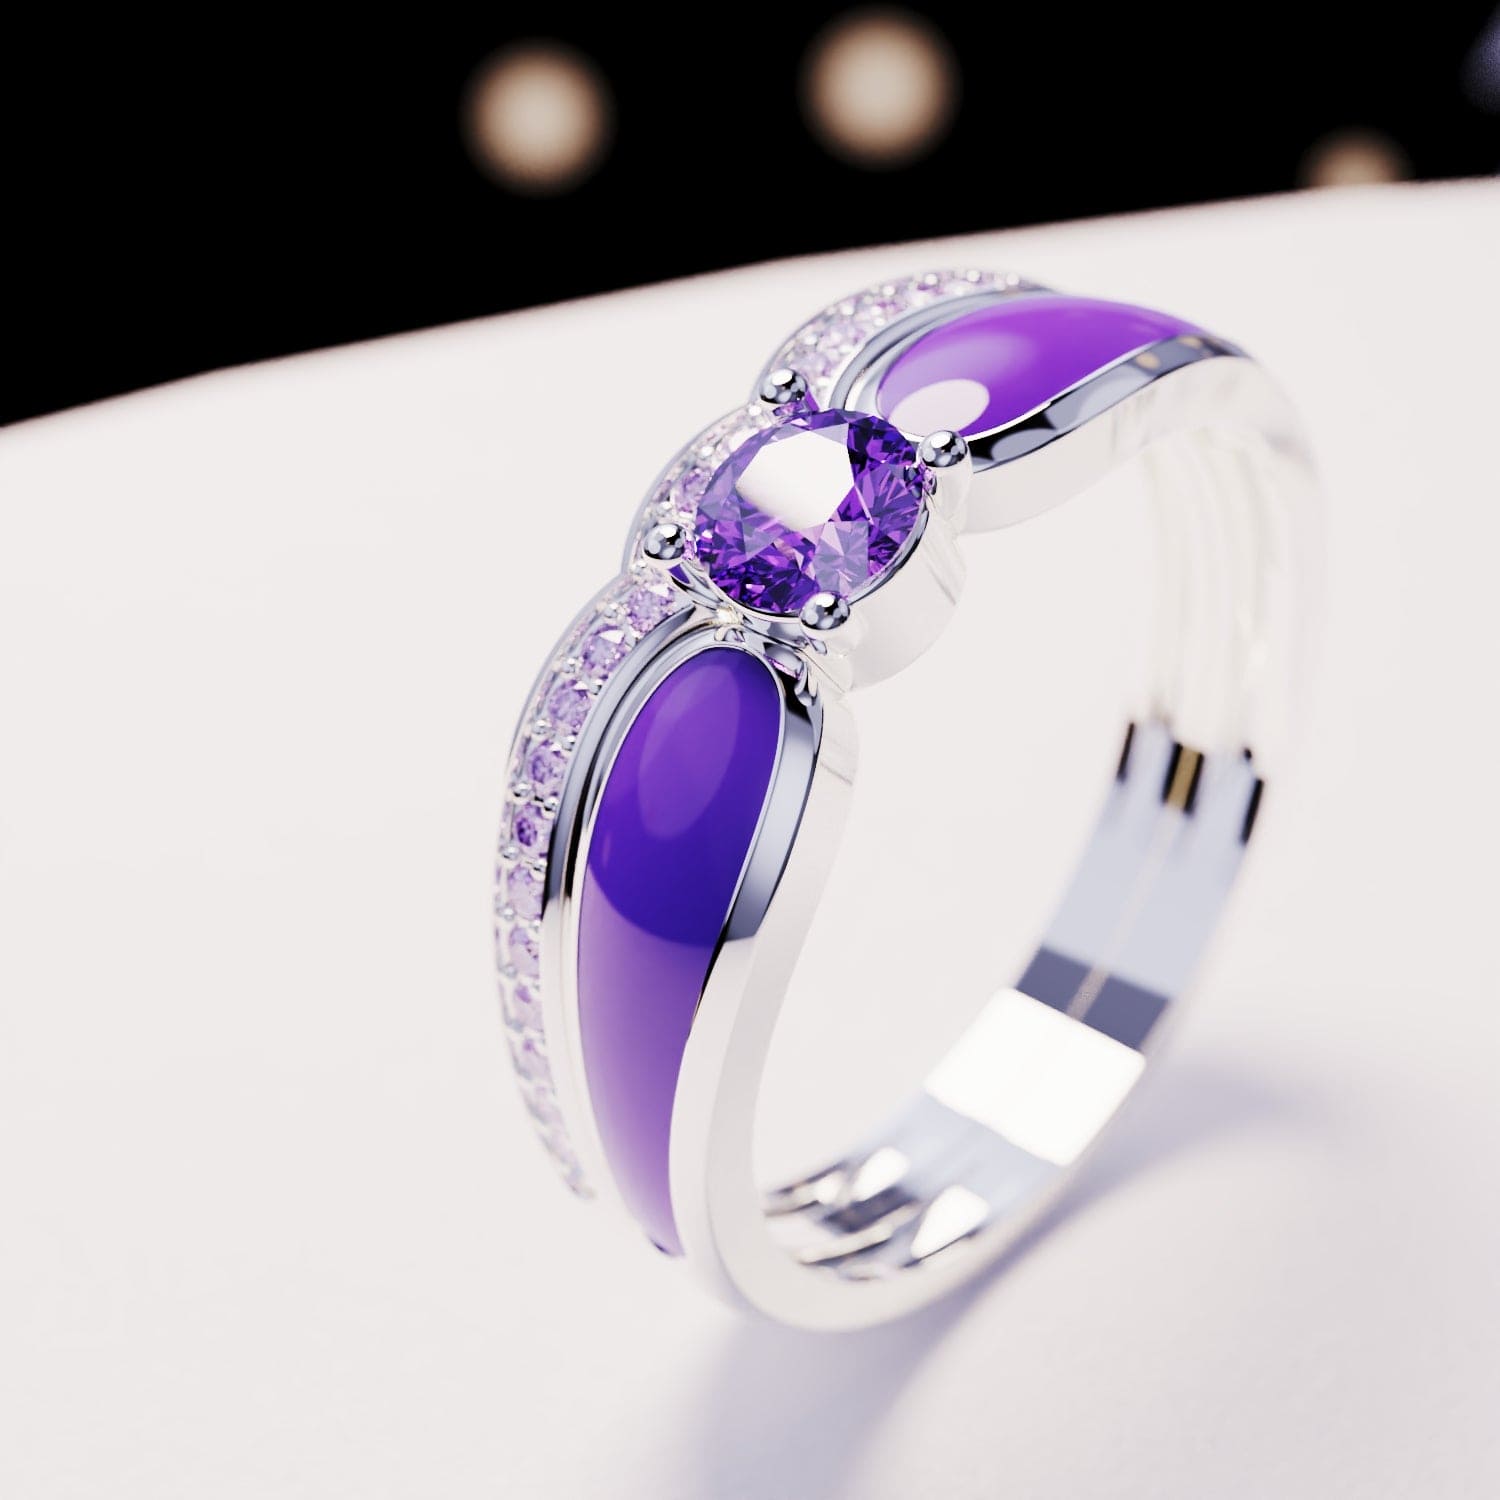 Violet Lagoon: 2-Piece Set Ring - S925 Sterling Silver